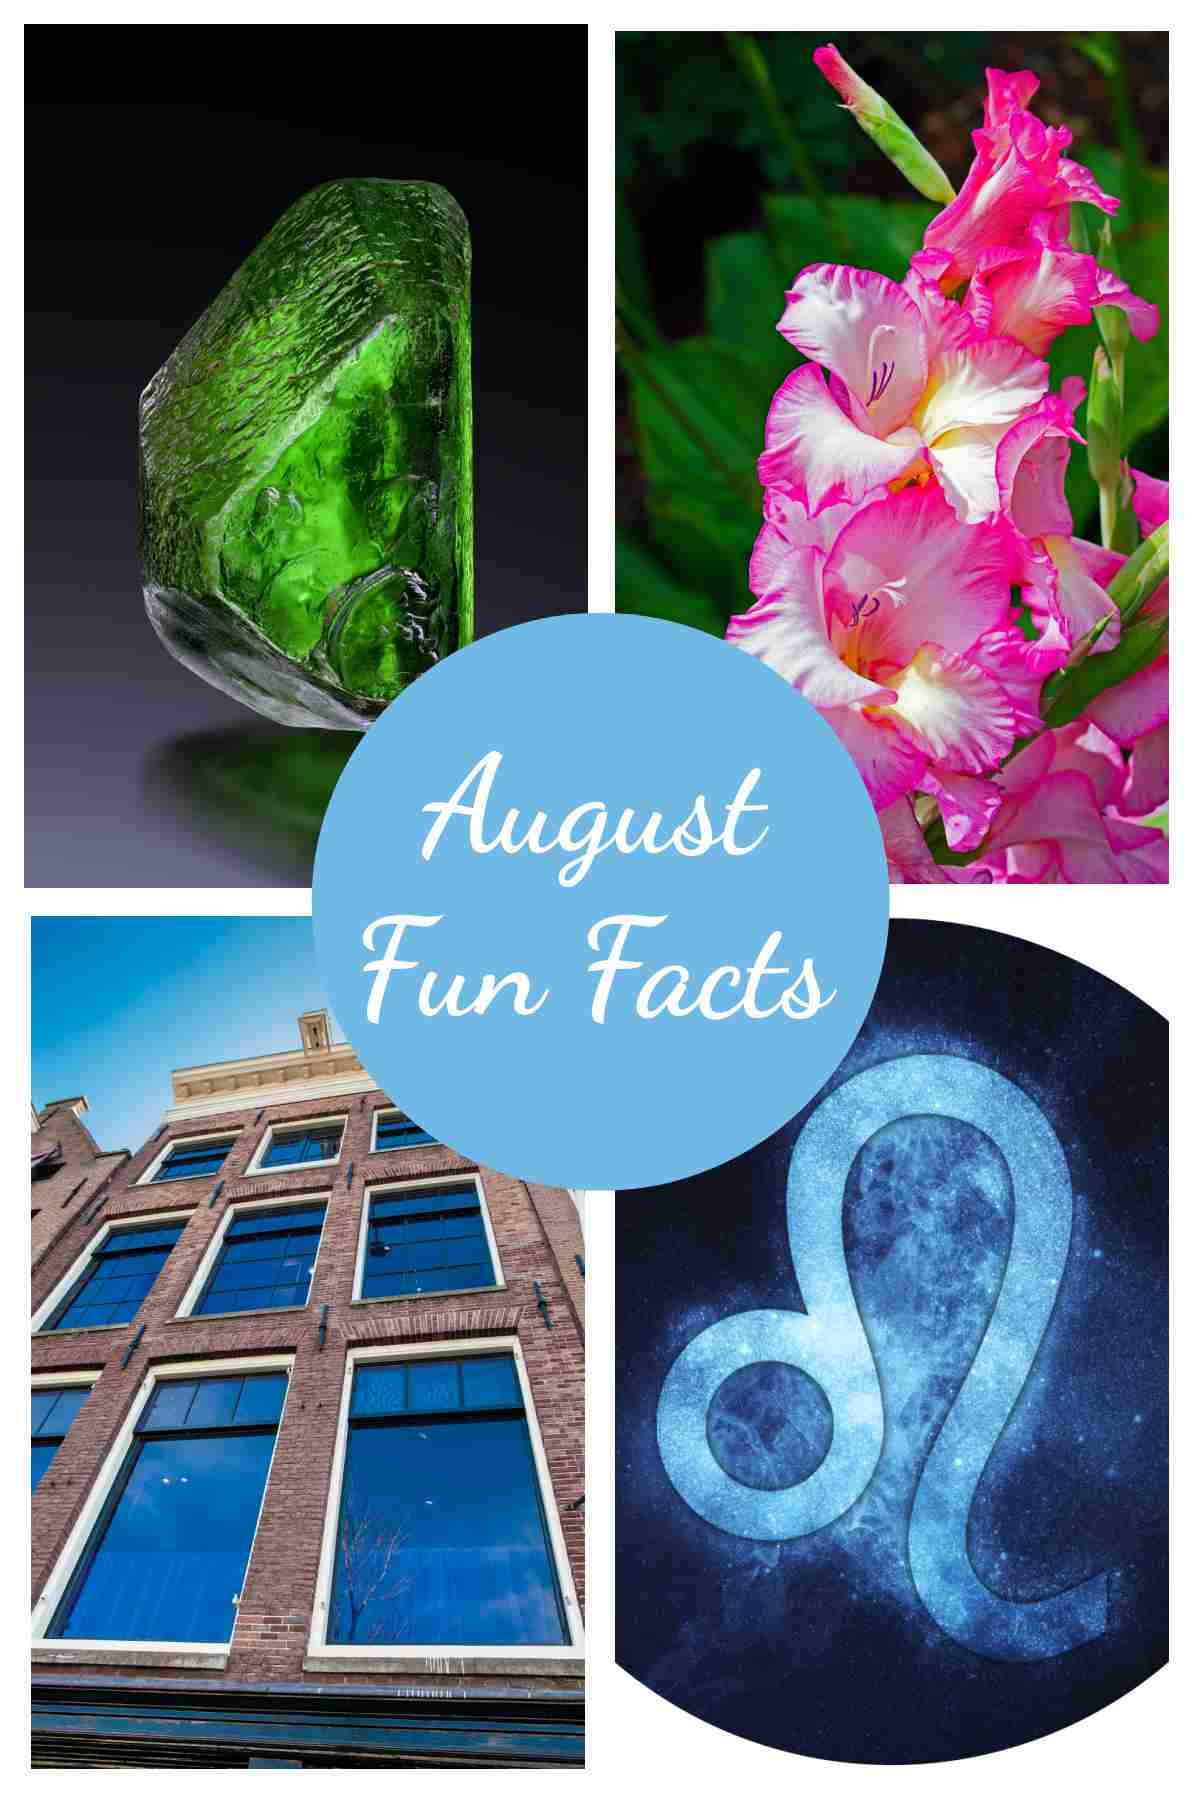 Peridot, gladiola, Anne Frank house, Leo zodiac sign with words August fun facts.